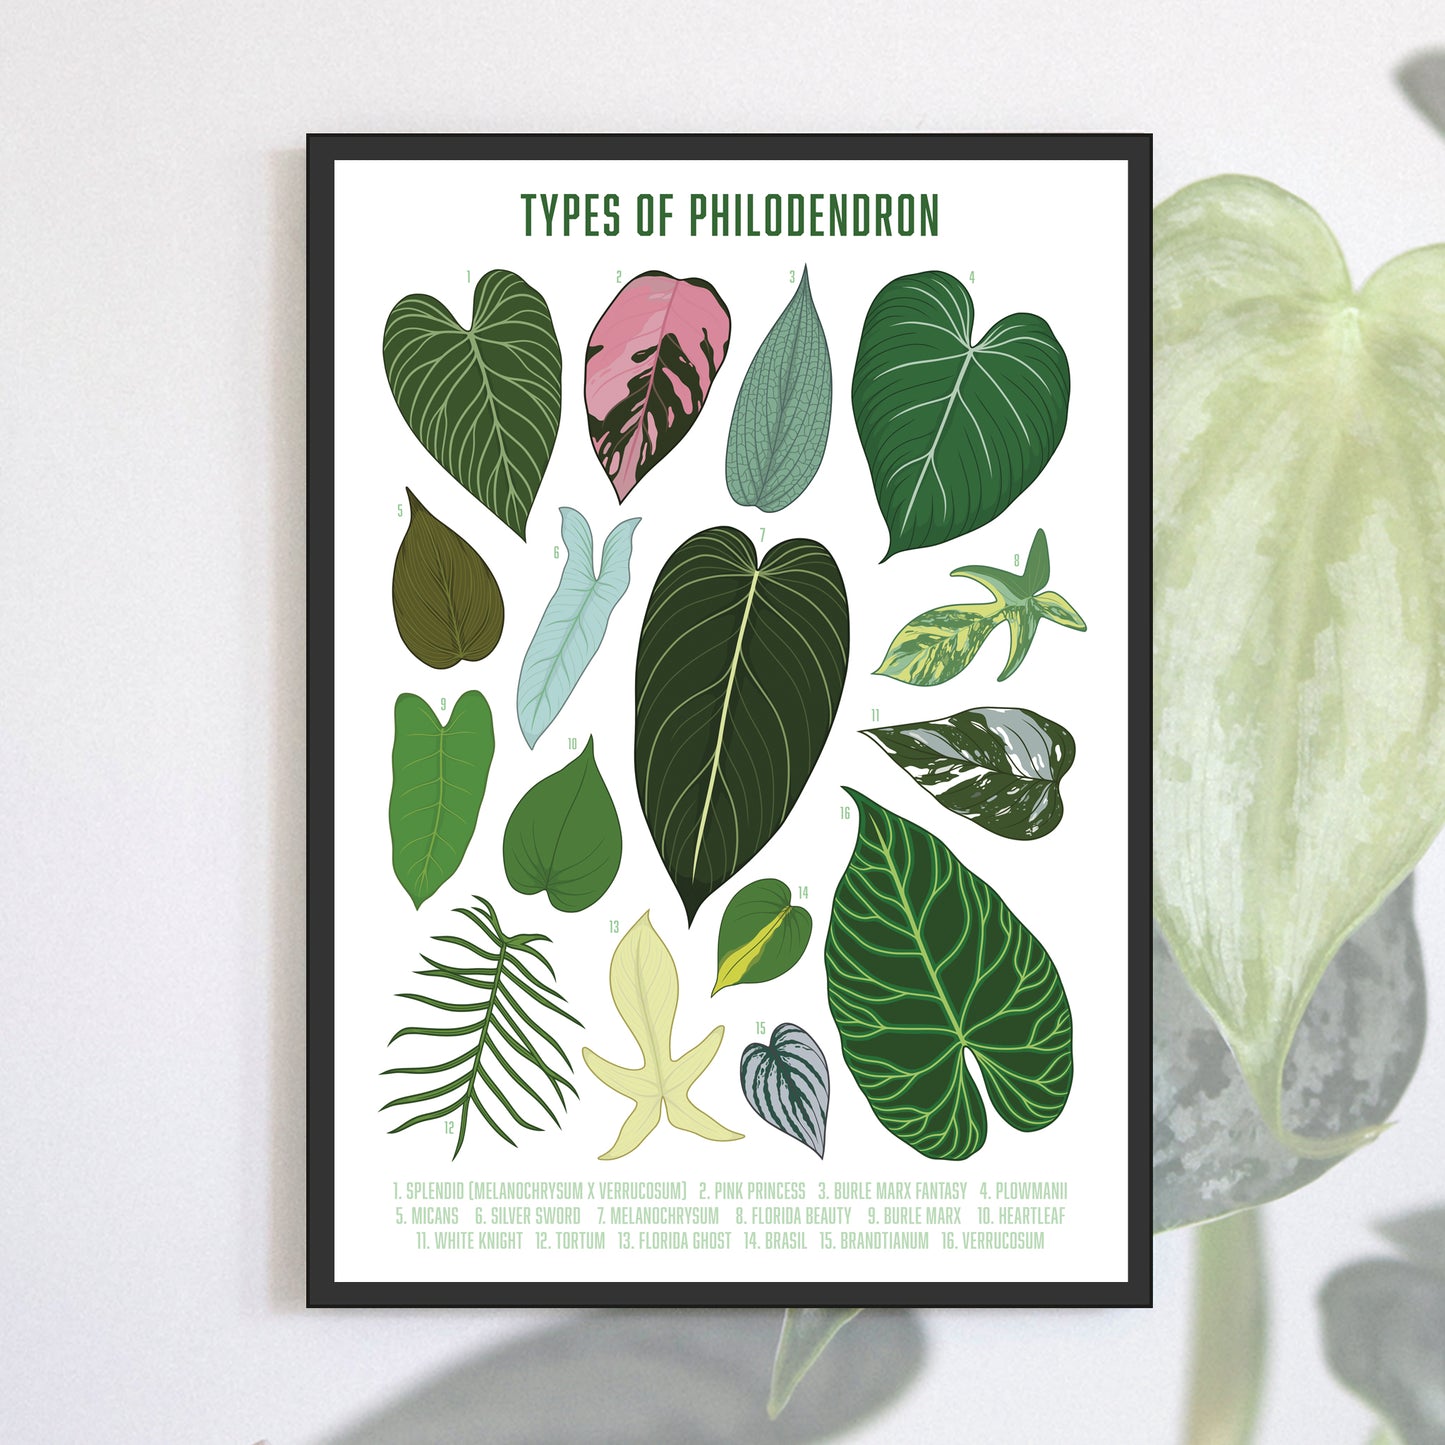 types of philodendron A3 houseplant poster digitally illustrated foliage art print